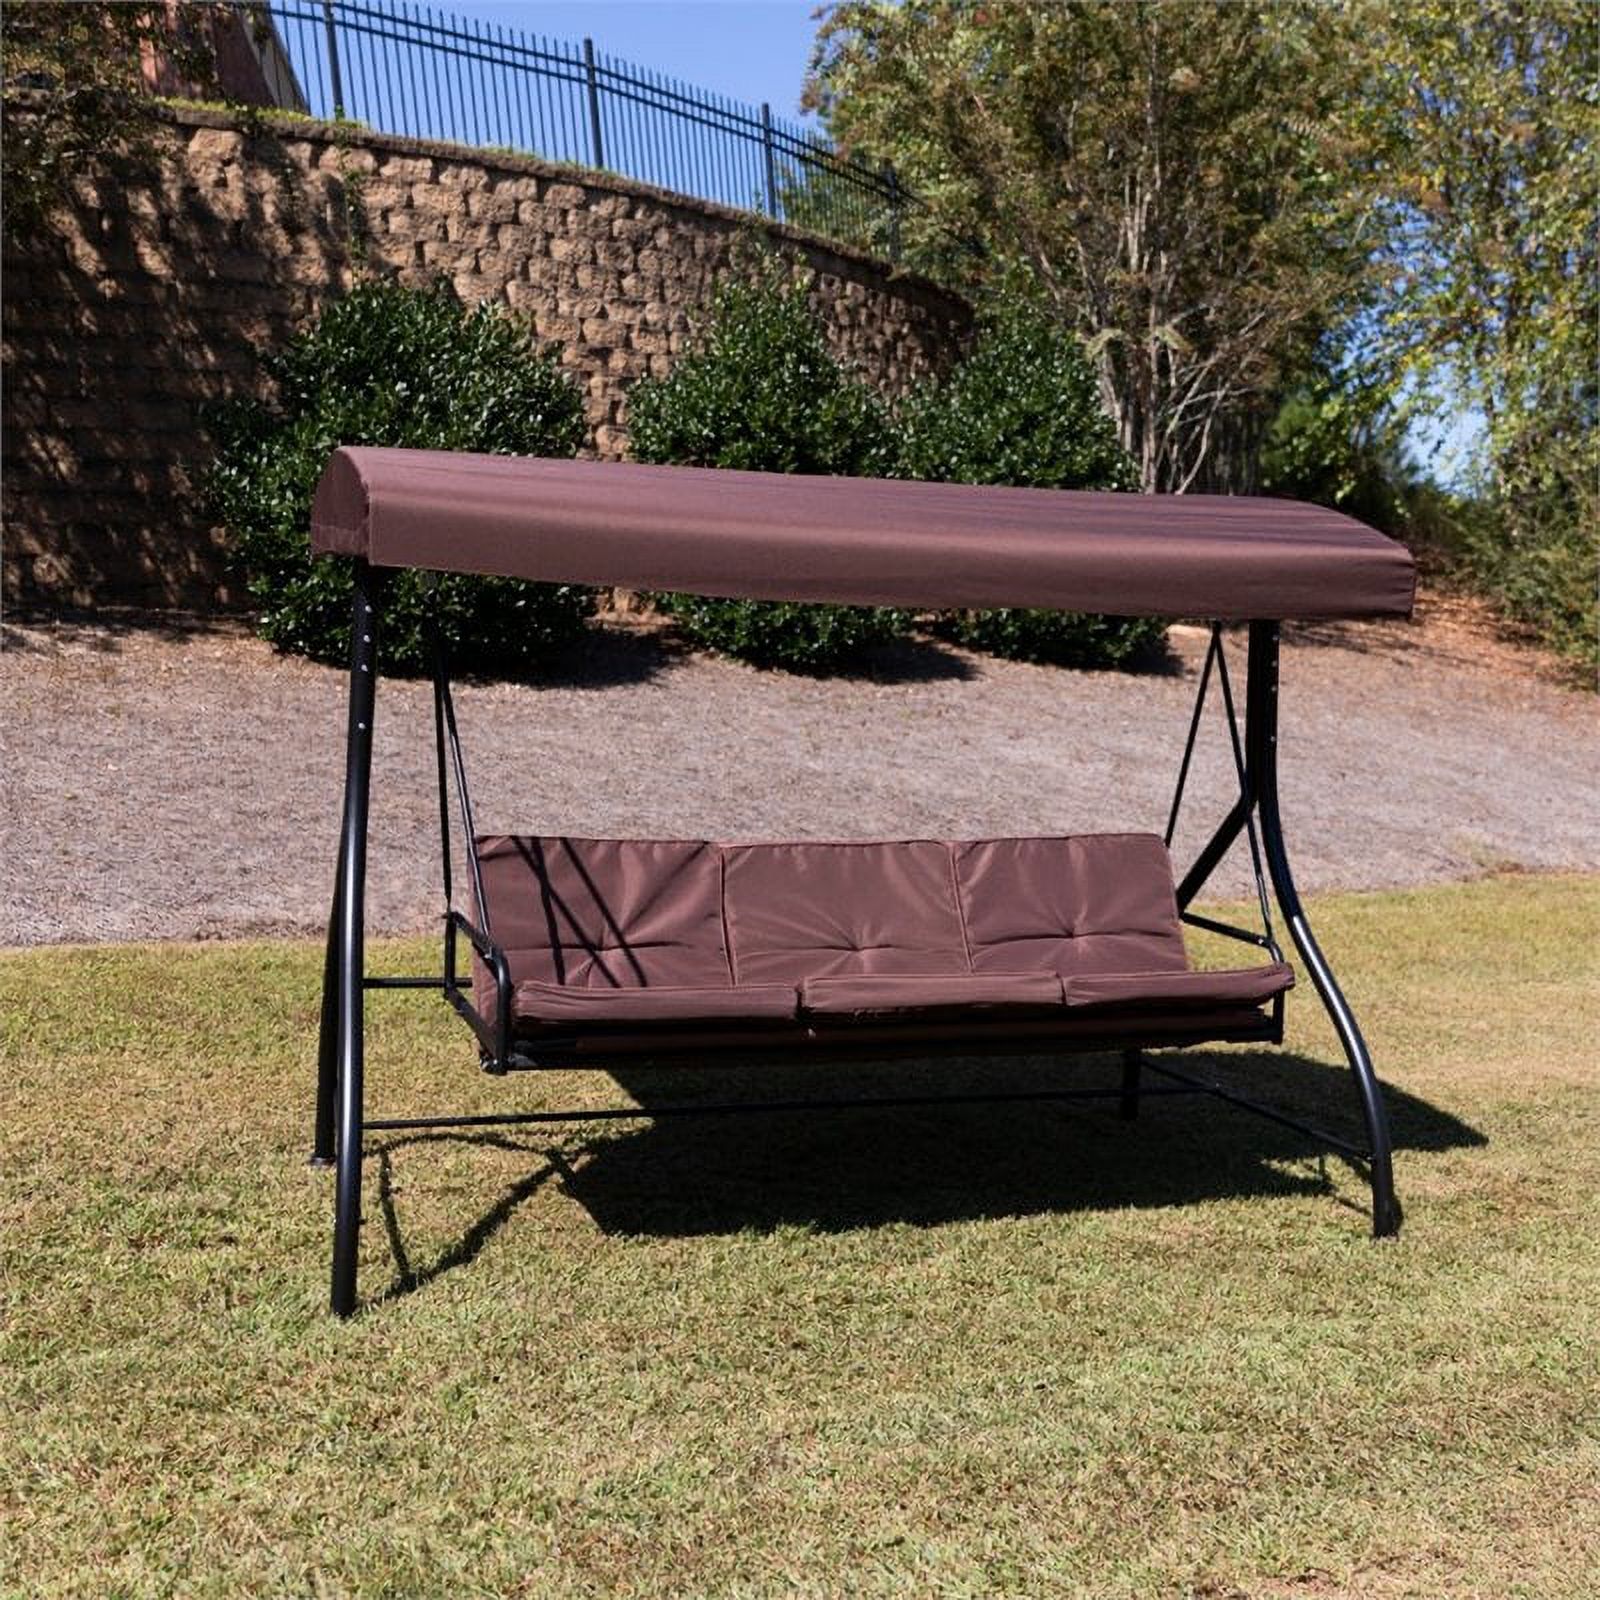 Afuera Living 3 Seat Patio Convertible Patio Swing and Hammock in Brown - image 2 of 12